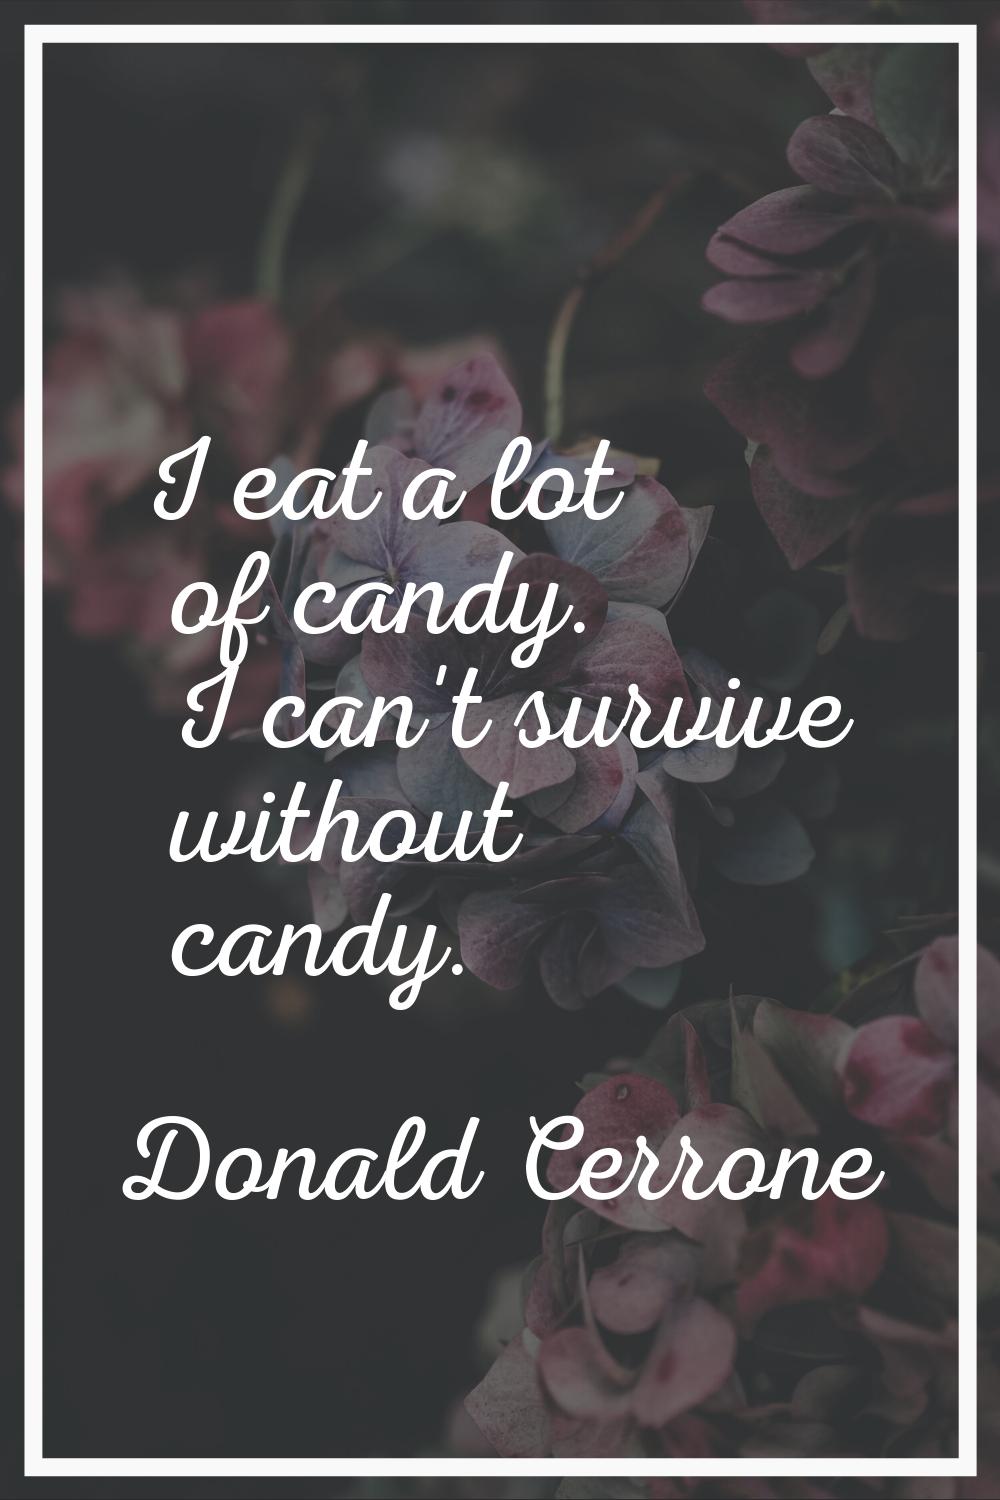 I eat a lot of candy. I can't survive without candy.